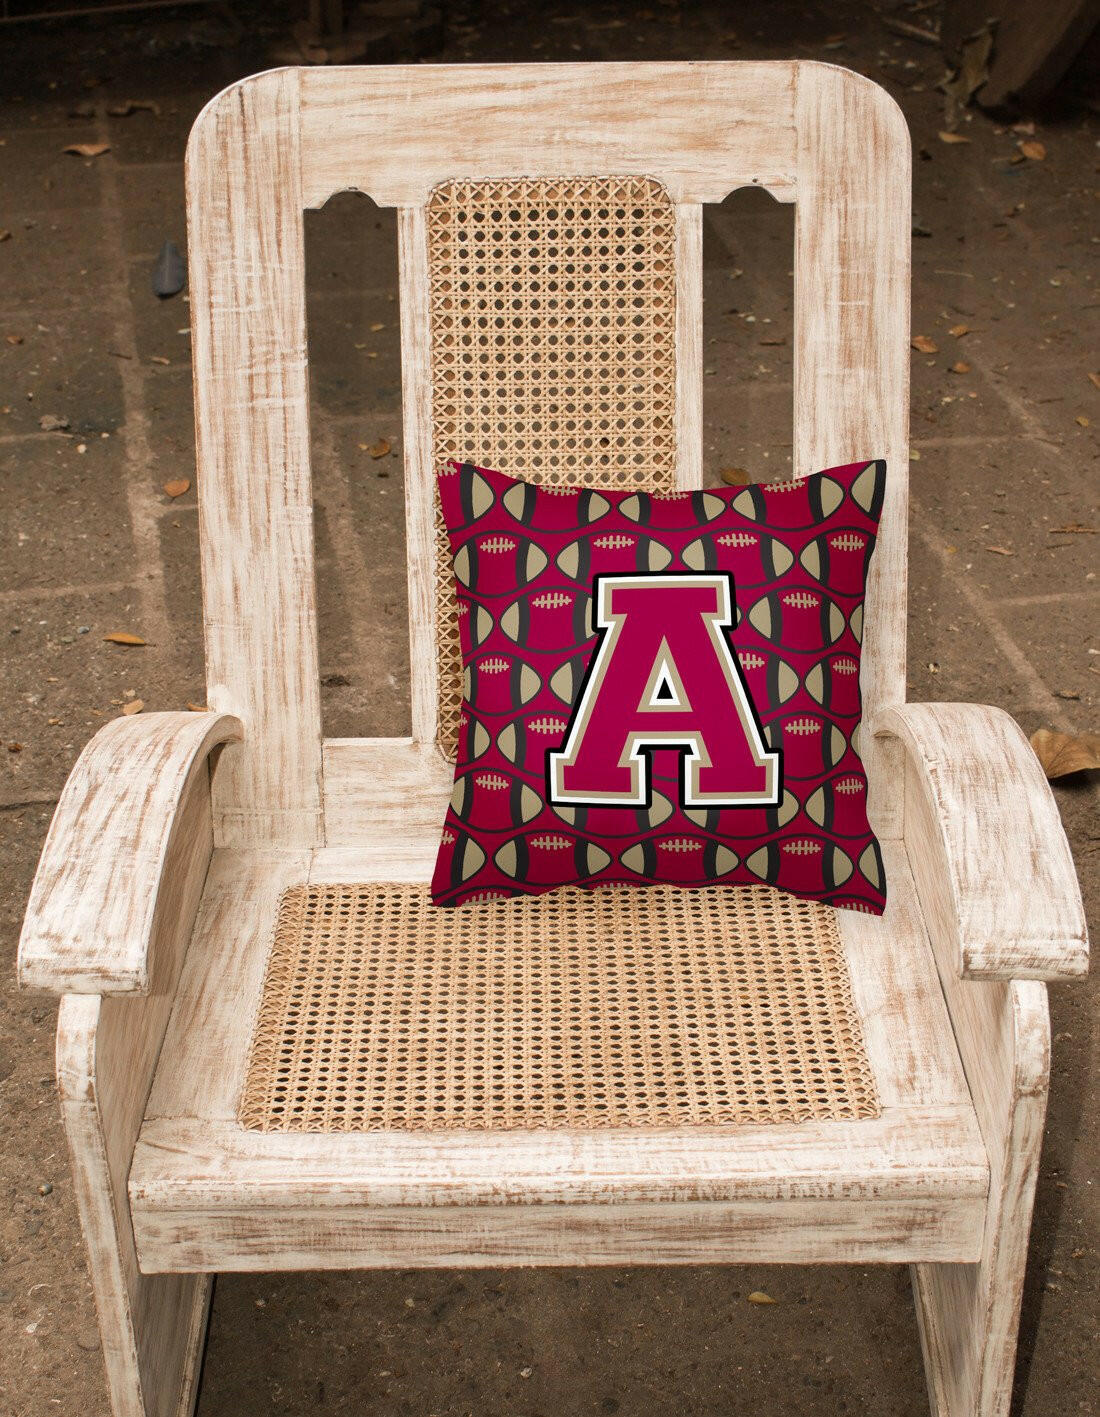 Letter A Football Garnet and Gold Fabric Decorative Pillow CJ1078-APW1414 by Caroline's Treasures